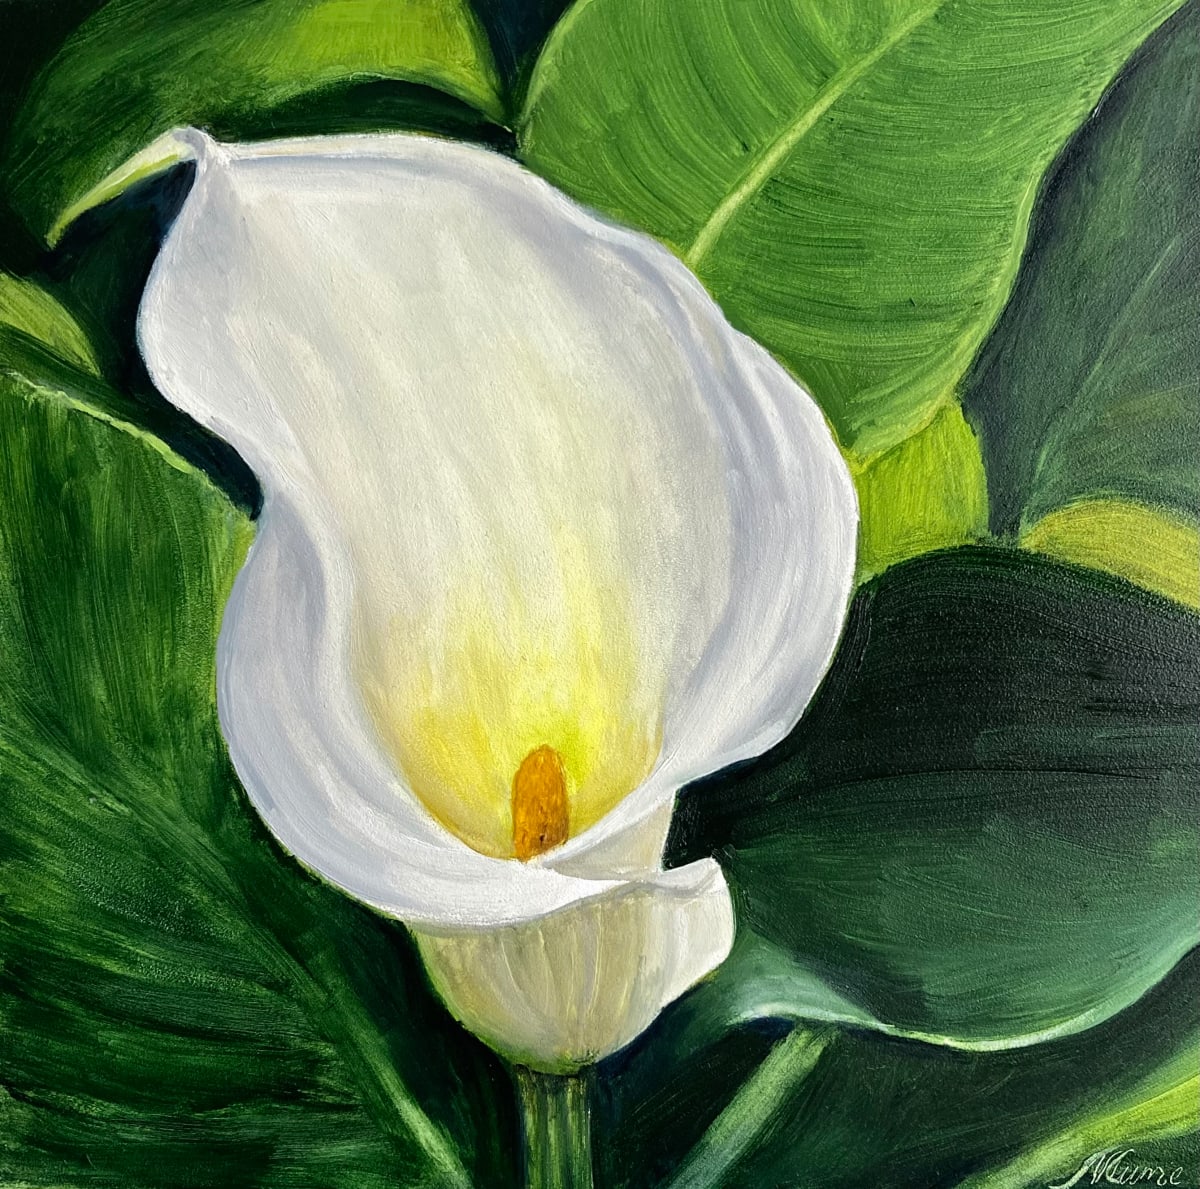 White Calla Lily by Nicola Currie  Image: Oil painting on gesso board
Framed in a white wood tray frame
For sale